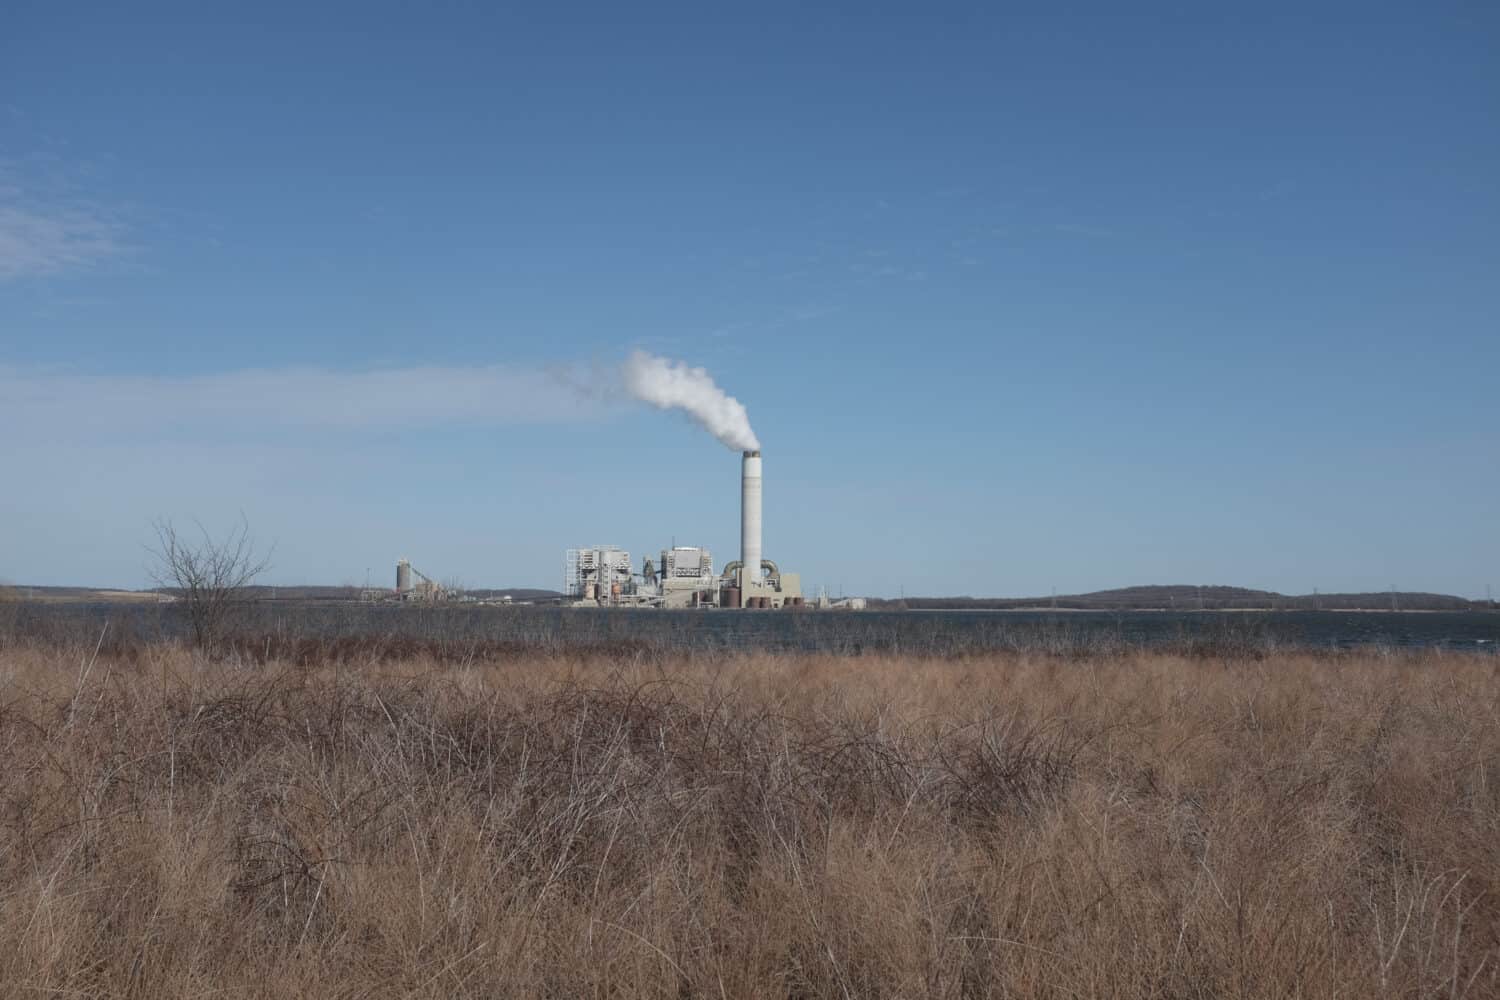 The La Cygne Generating Station, a coal-fired power power plant in Kansas.